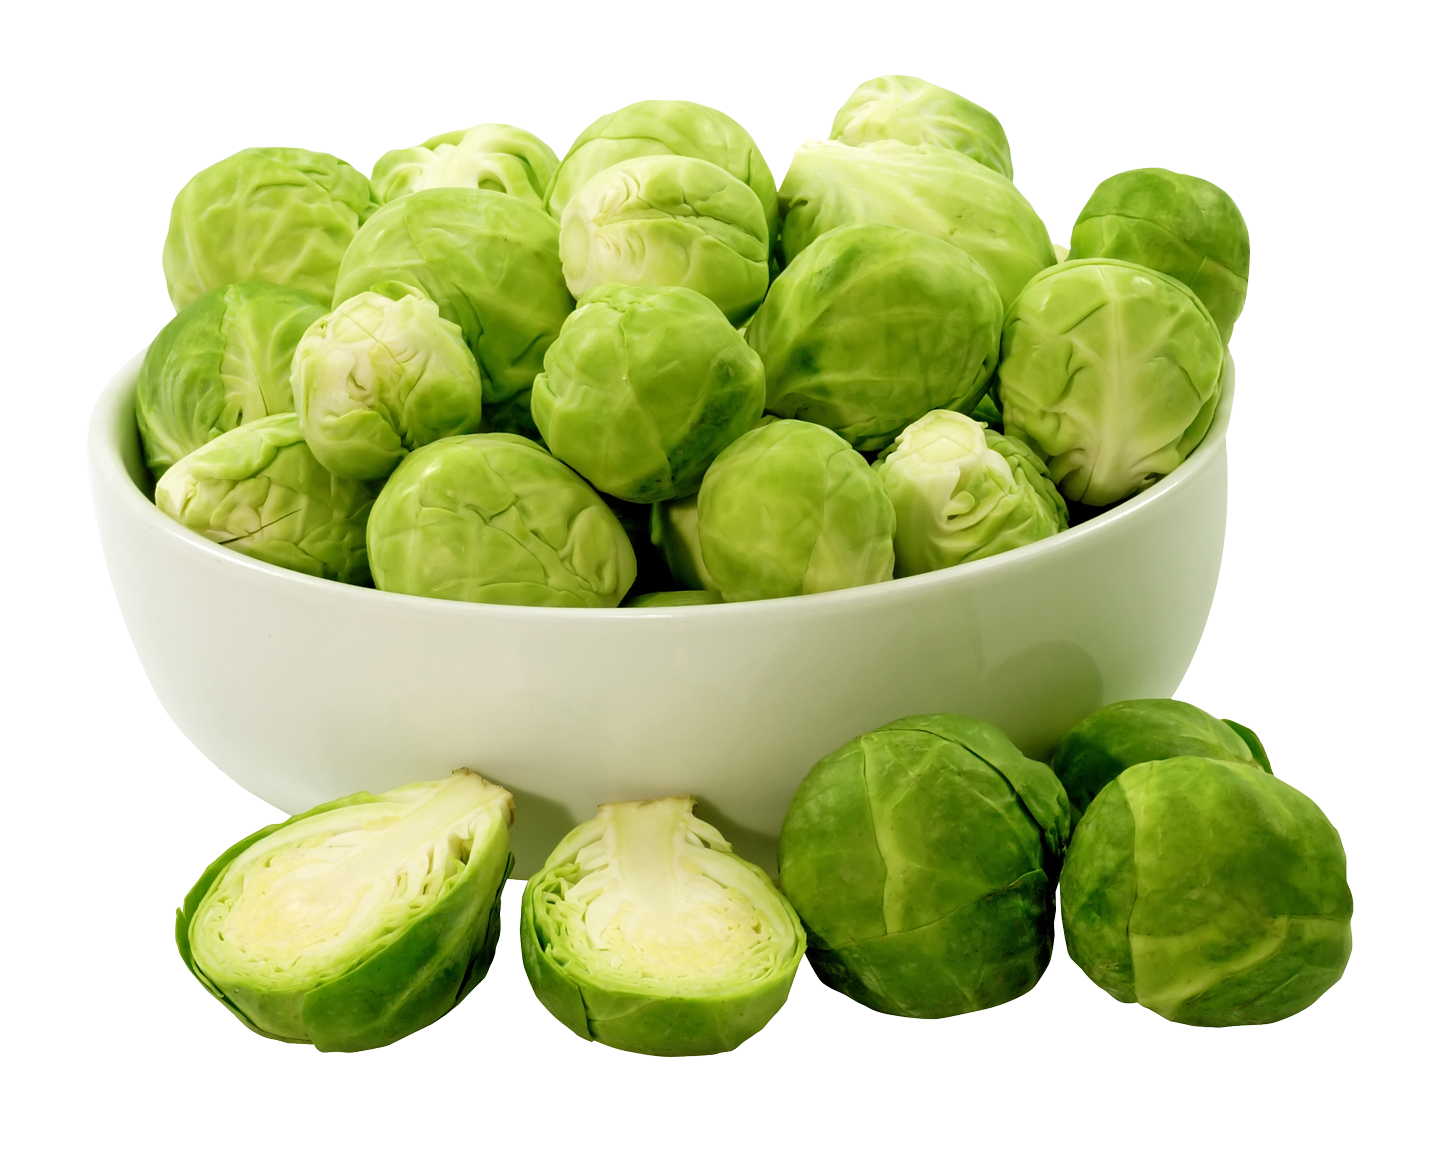 A Bowl Of Brussels Sprouts